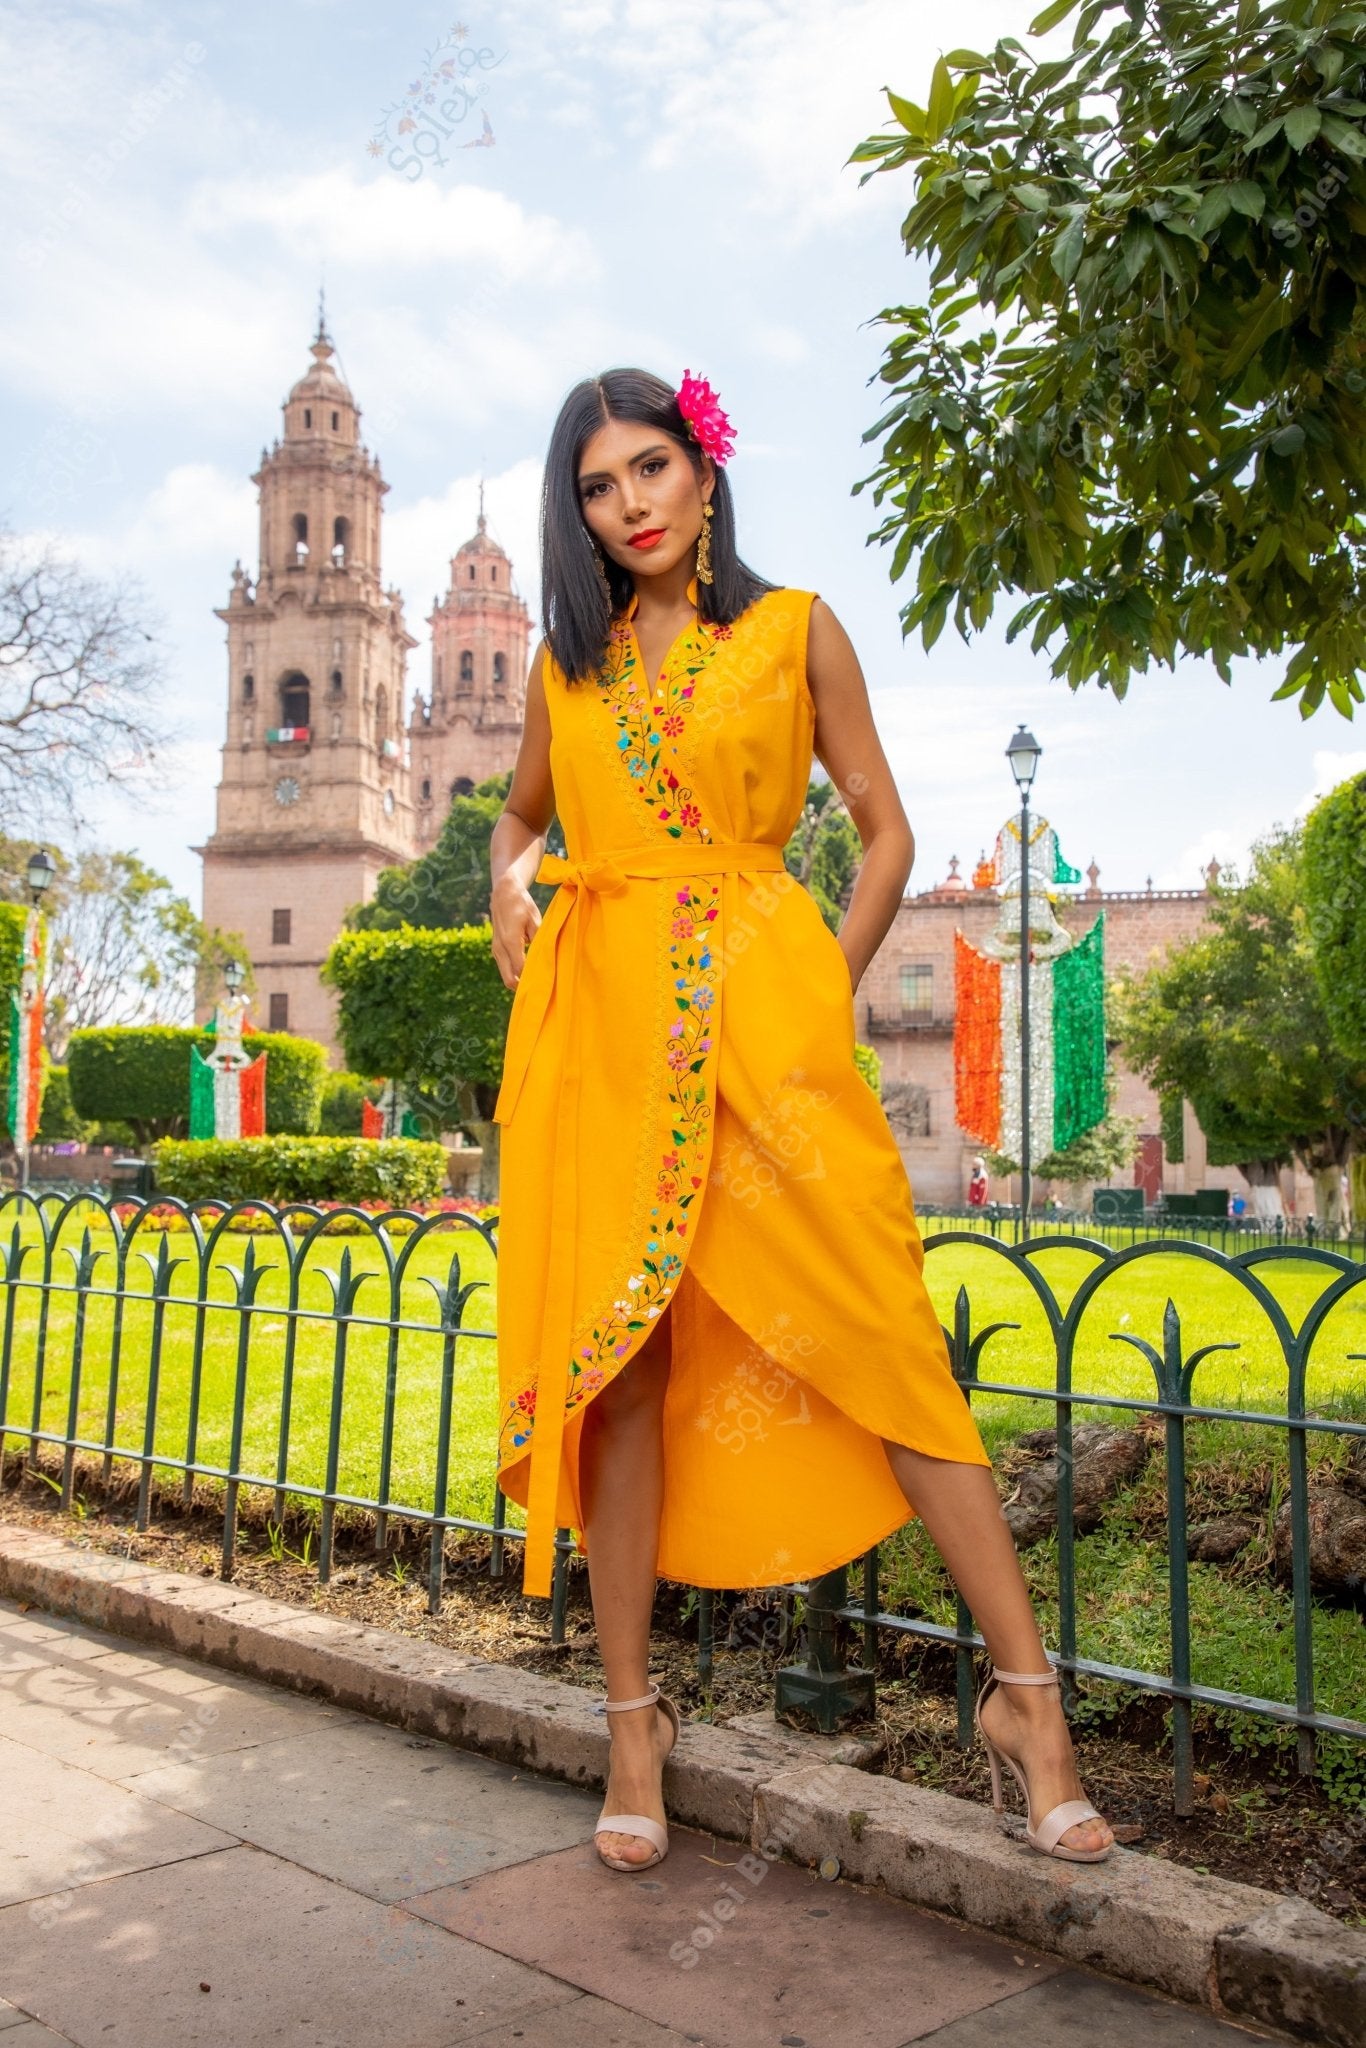 Mexican Hand Embroidered Mexican Dress. Mexican Wrap Dress. Antonella Dress. - Solei Store